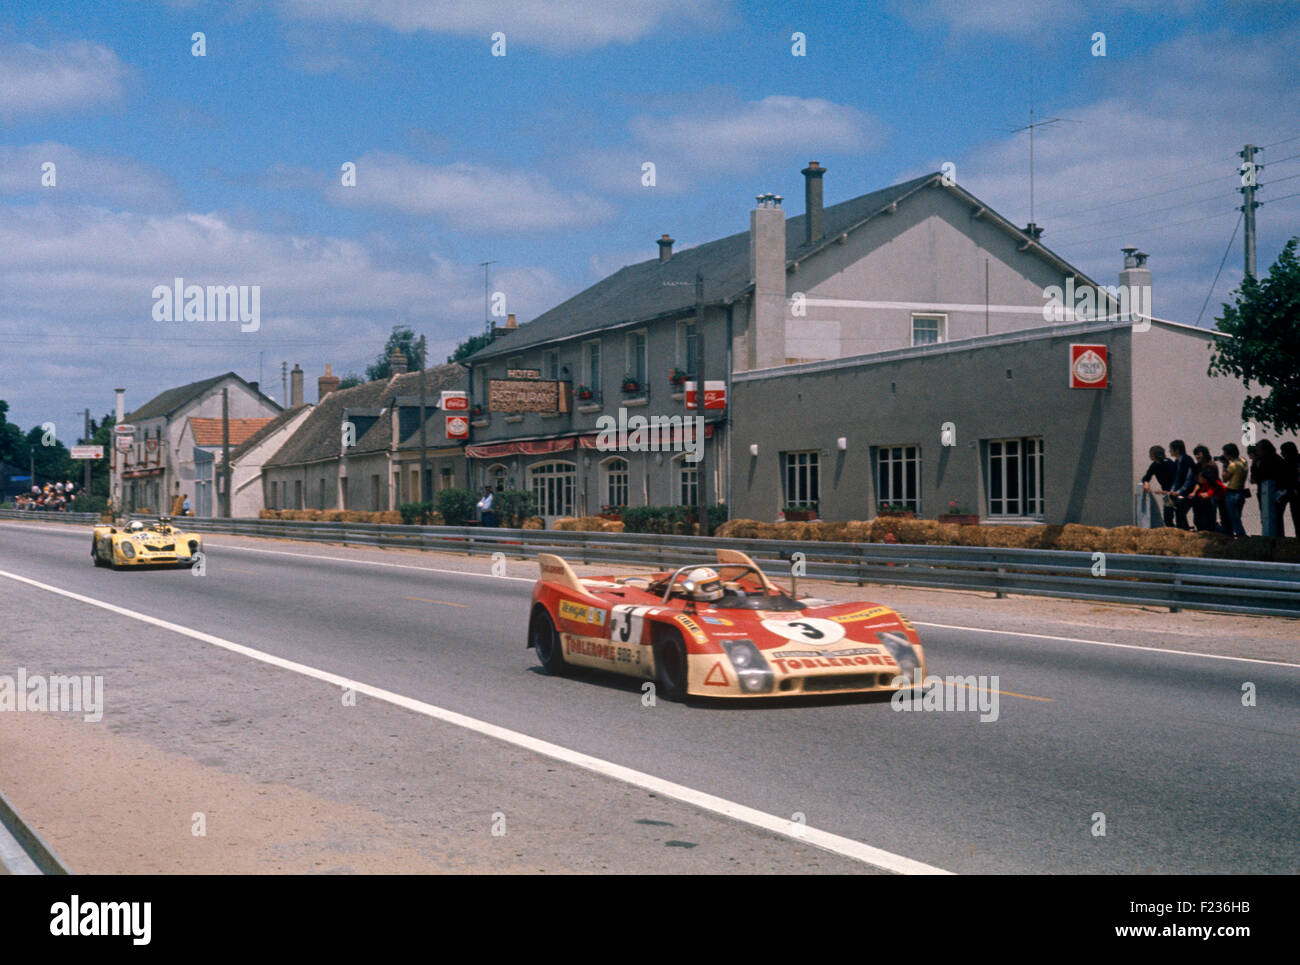 3 Juan Fernandez, Bernard Cheneviere and Francisco Torredemer Porsche 908 at Les Hunaudieres on the Mulsanne Straight Le Mans 10 June 1973 Stock Photo